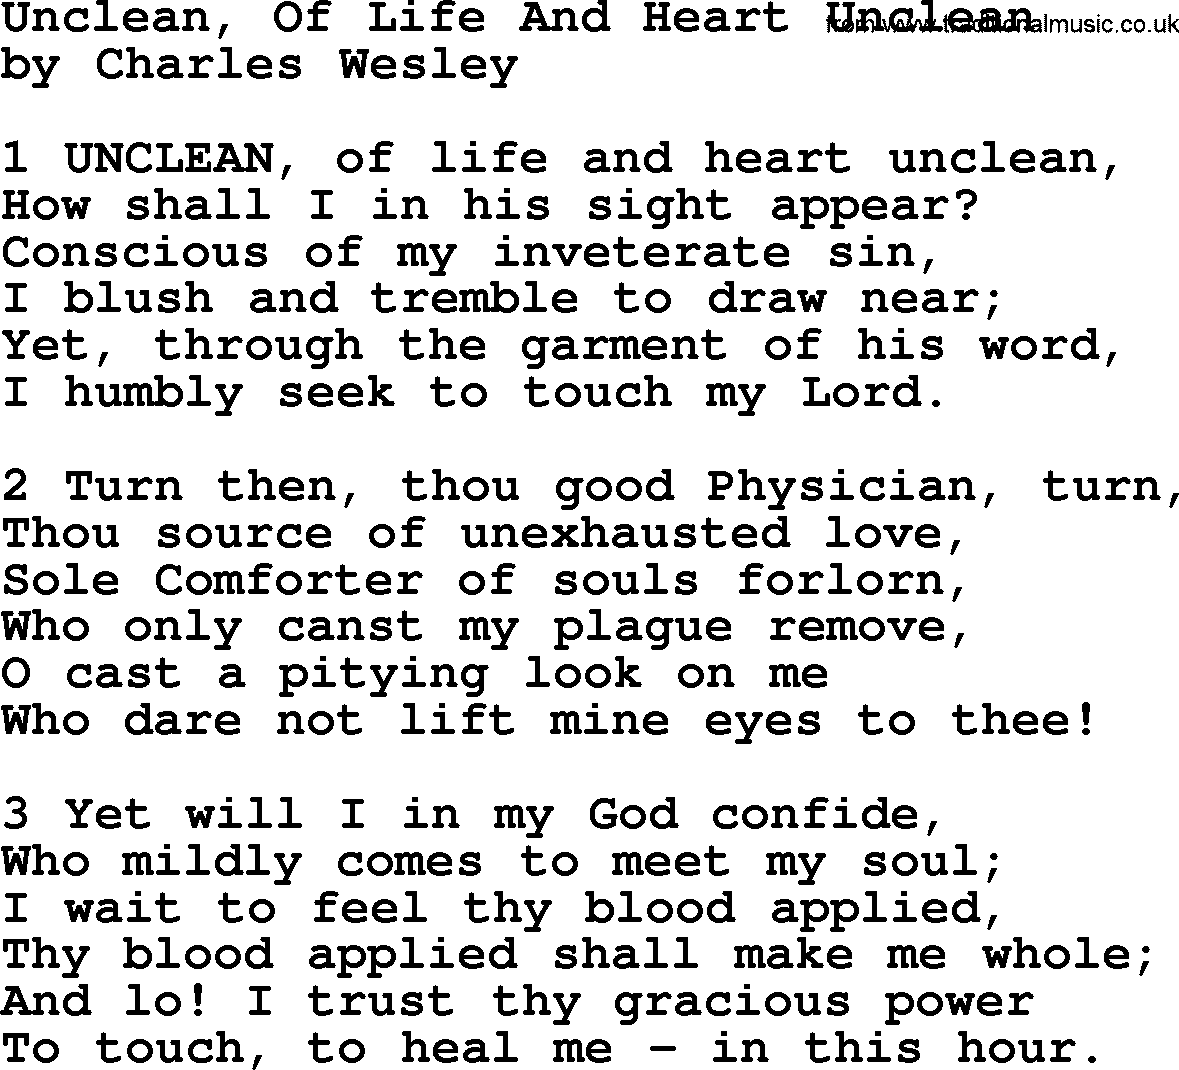 Charles Wesley hymn: Unclean, Of Life And Heart Unclean, lyrics